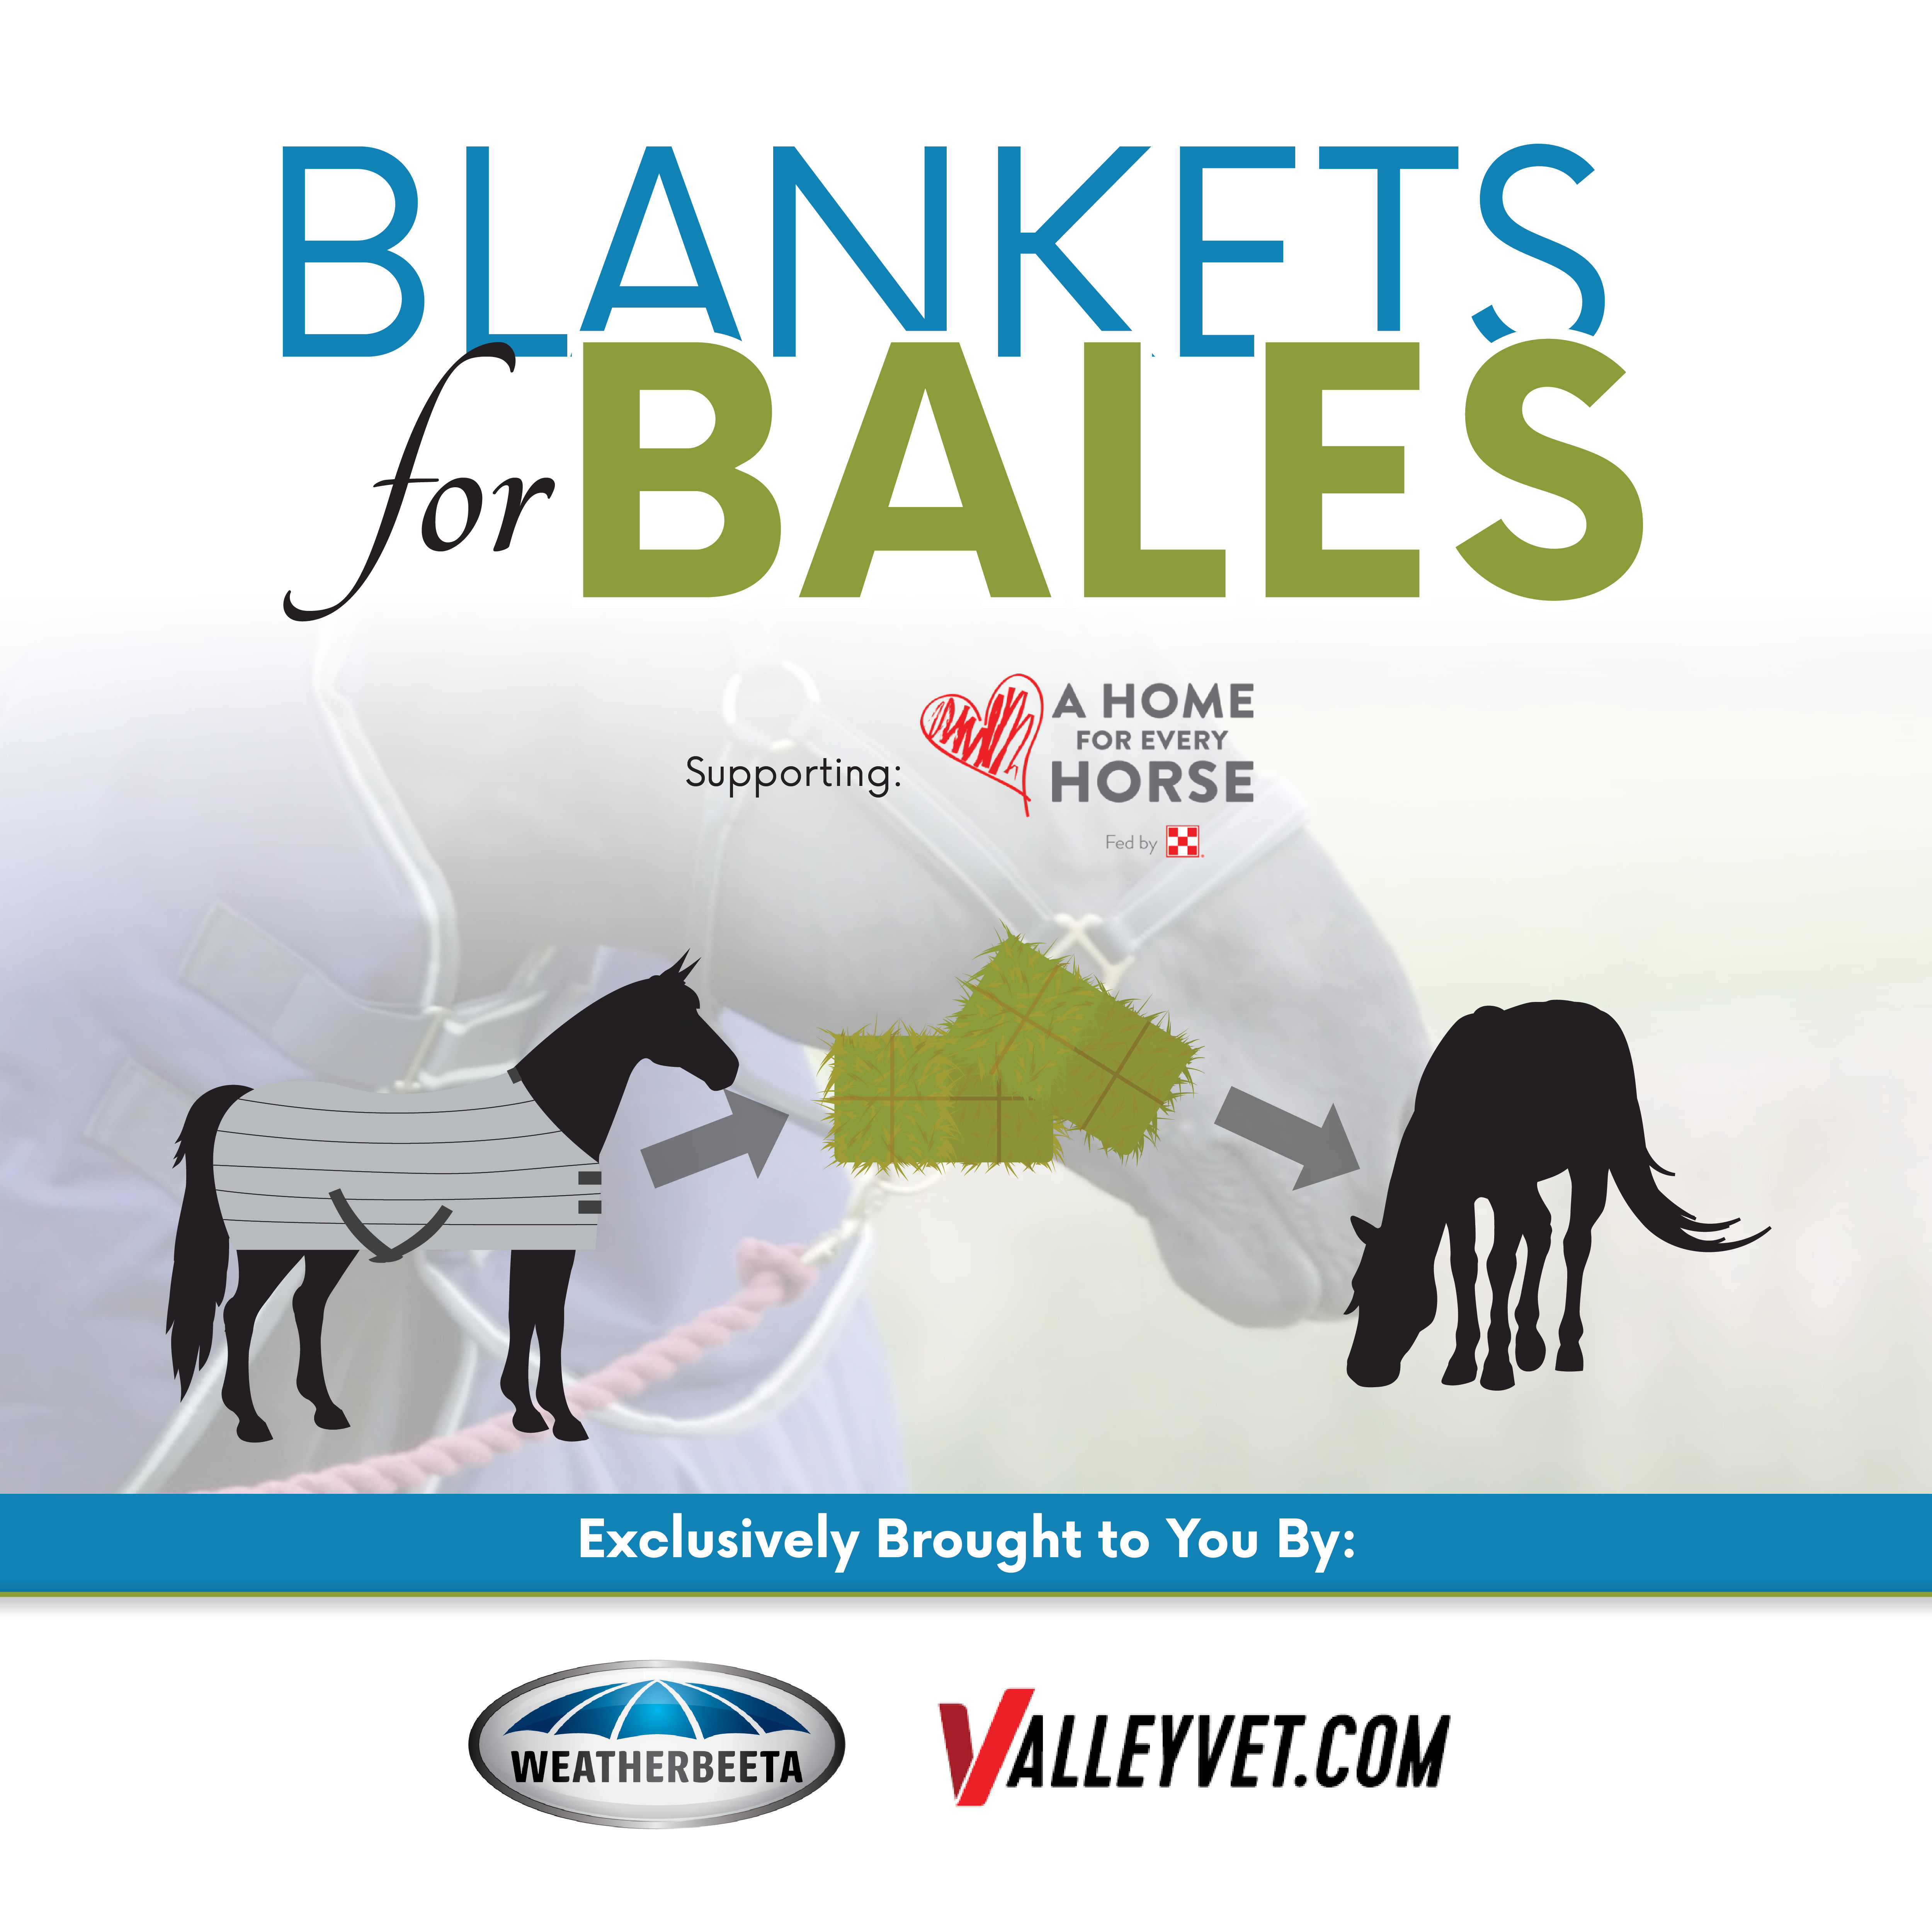 blankets for bales, supporting a home for every horse